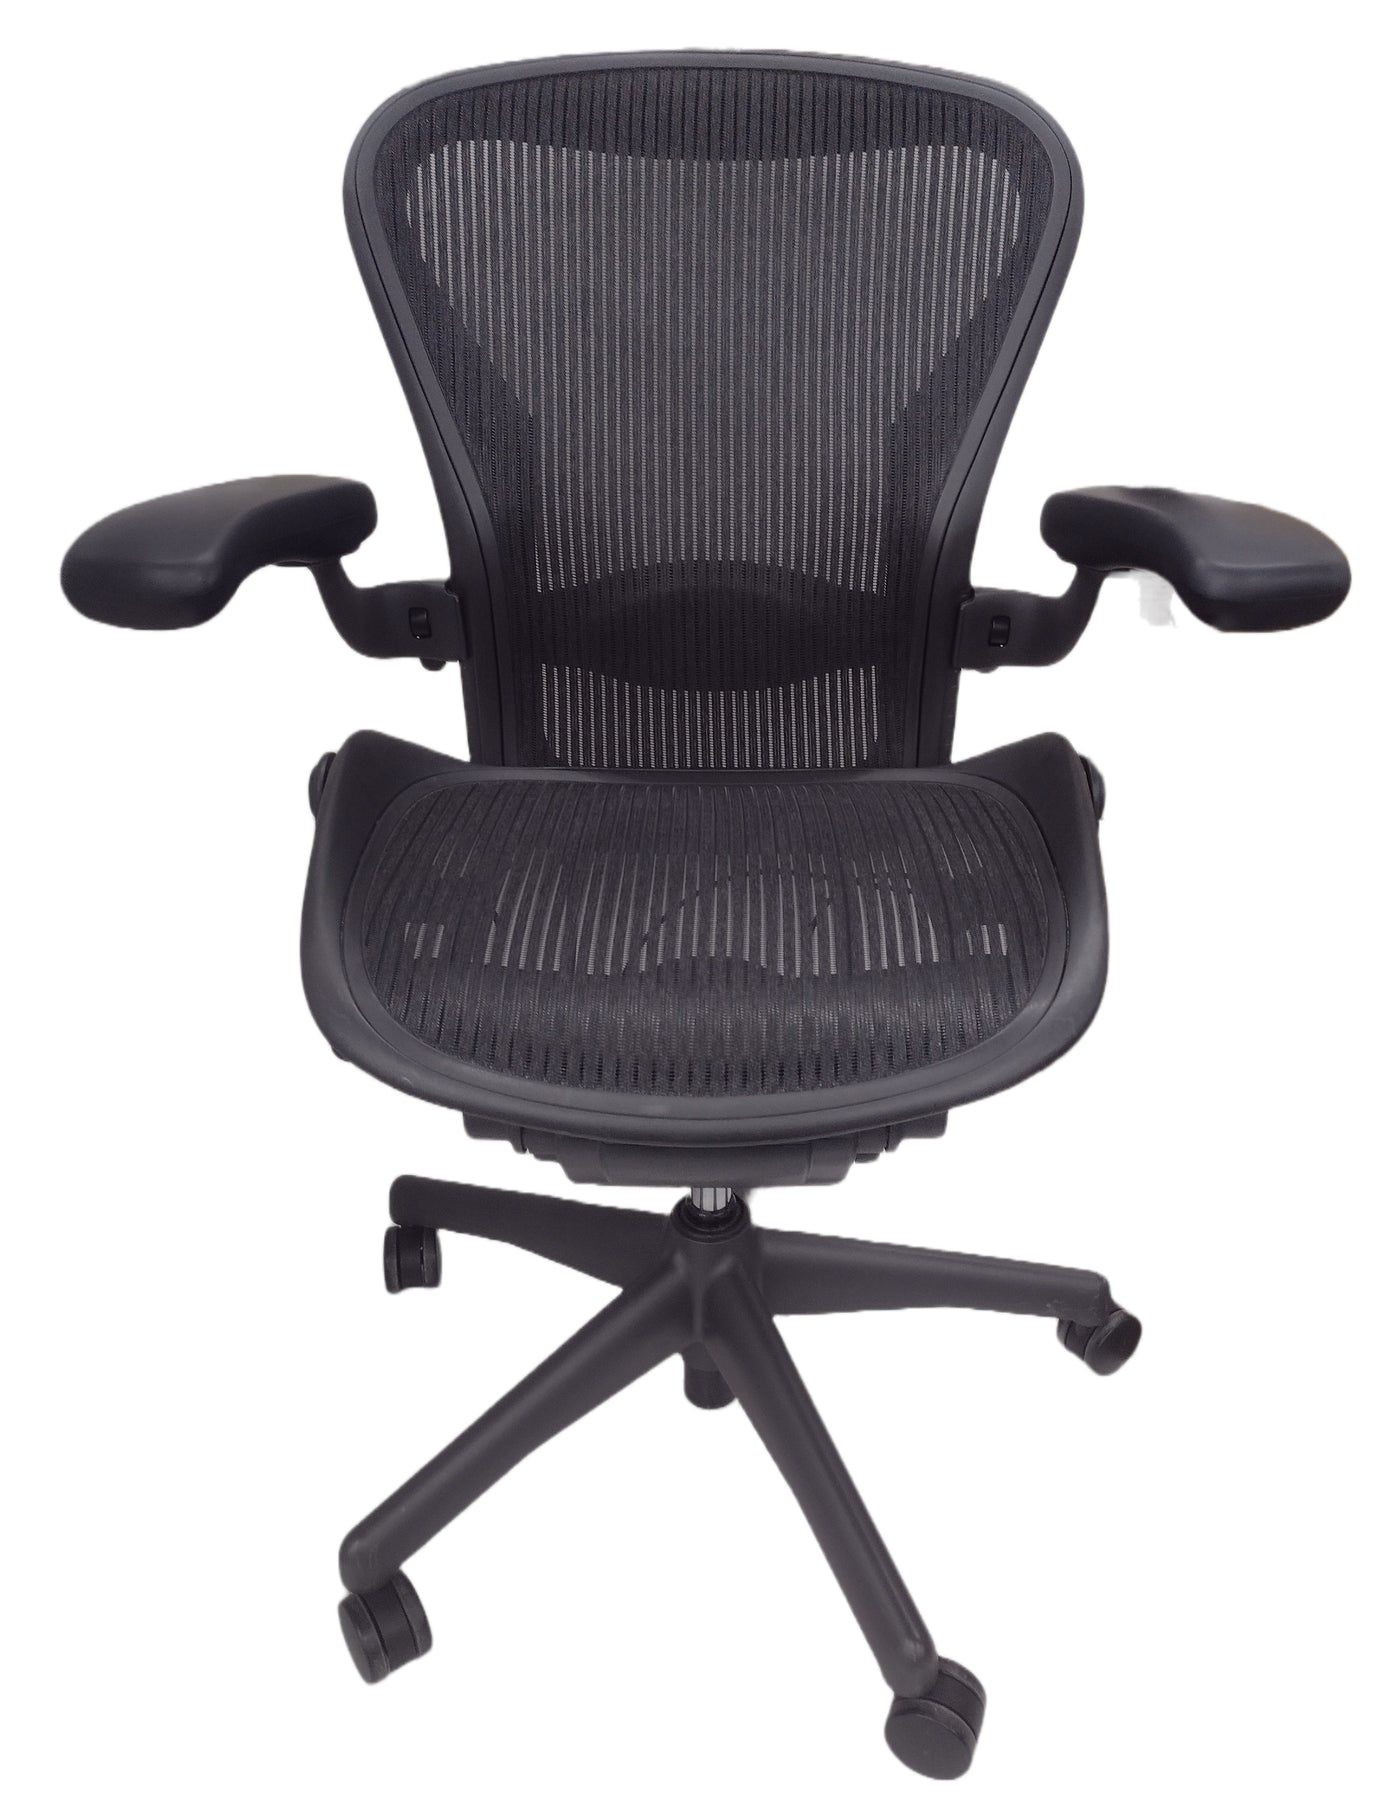 Aeron Herman Miller Office Chair Size B Fully with Posture Fit